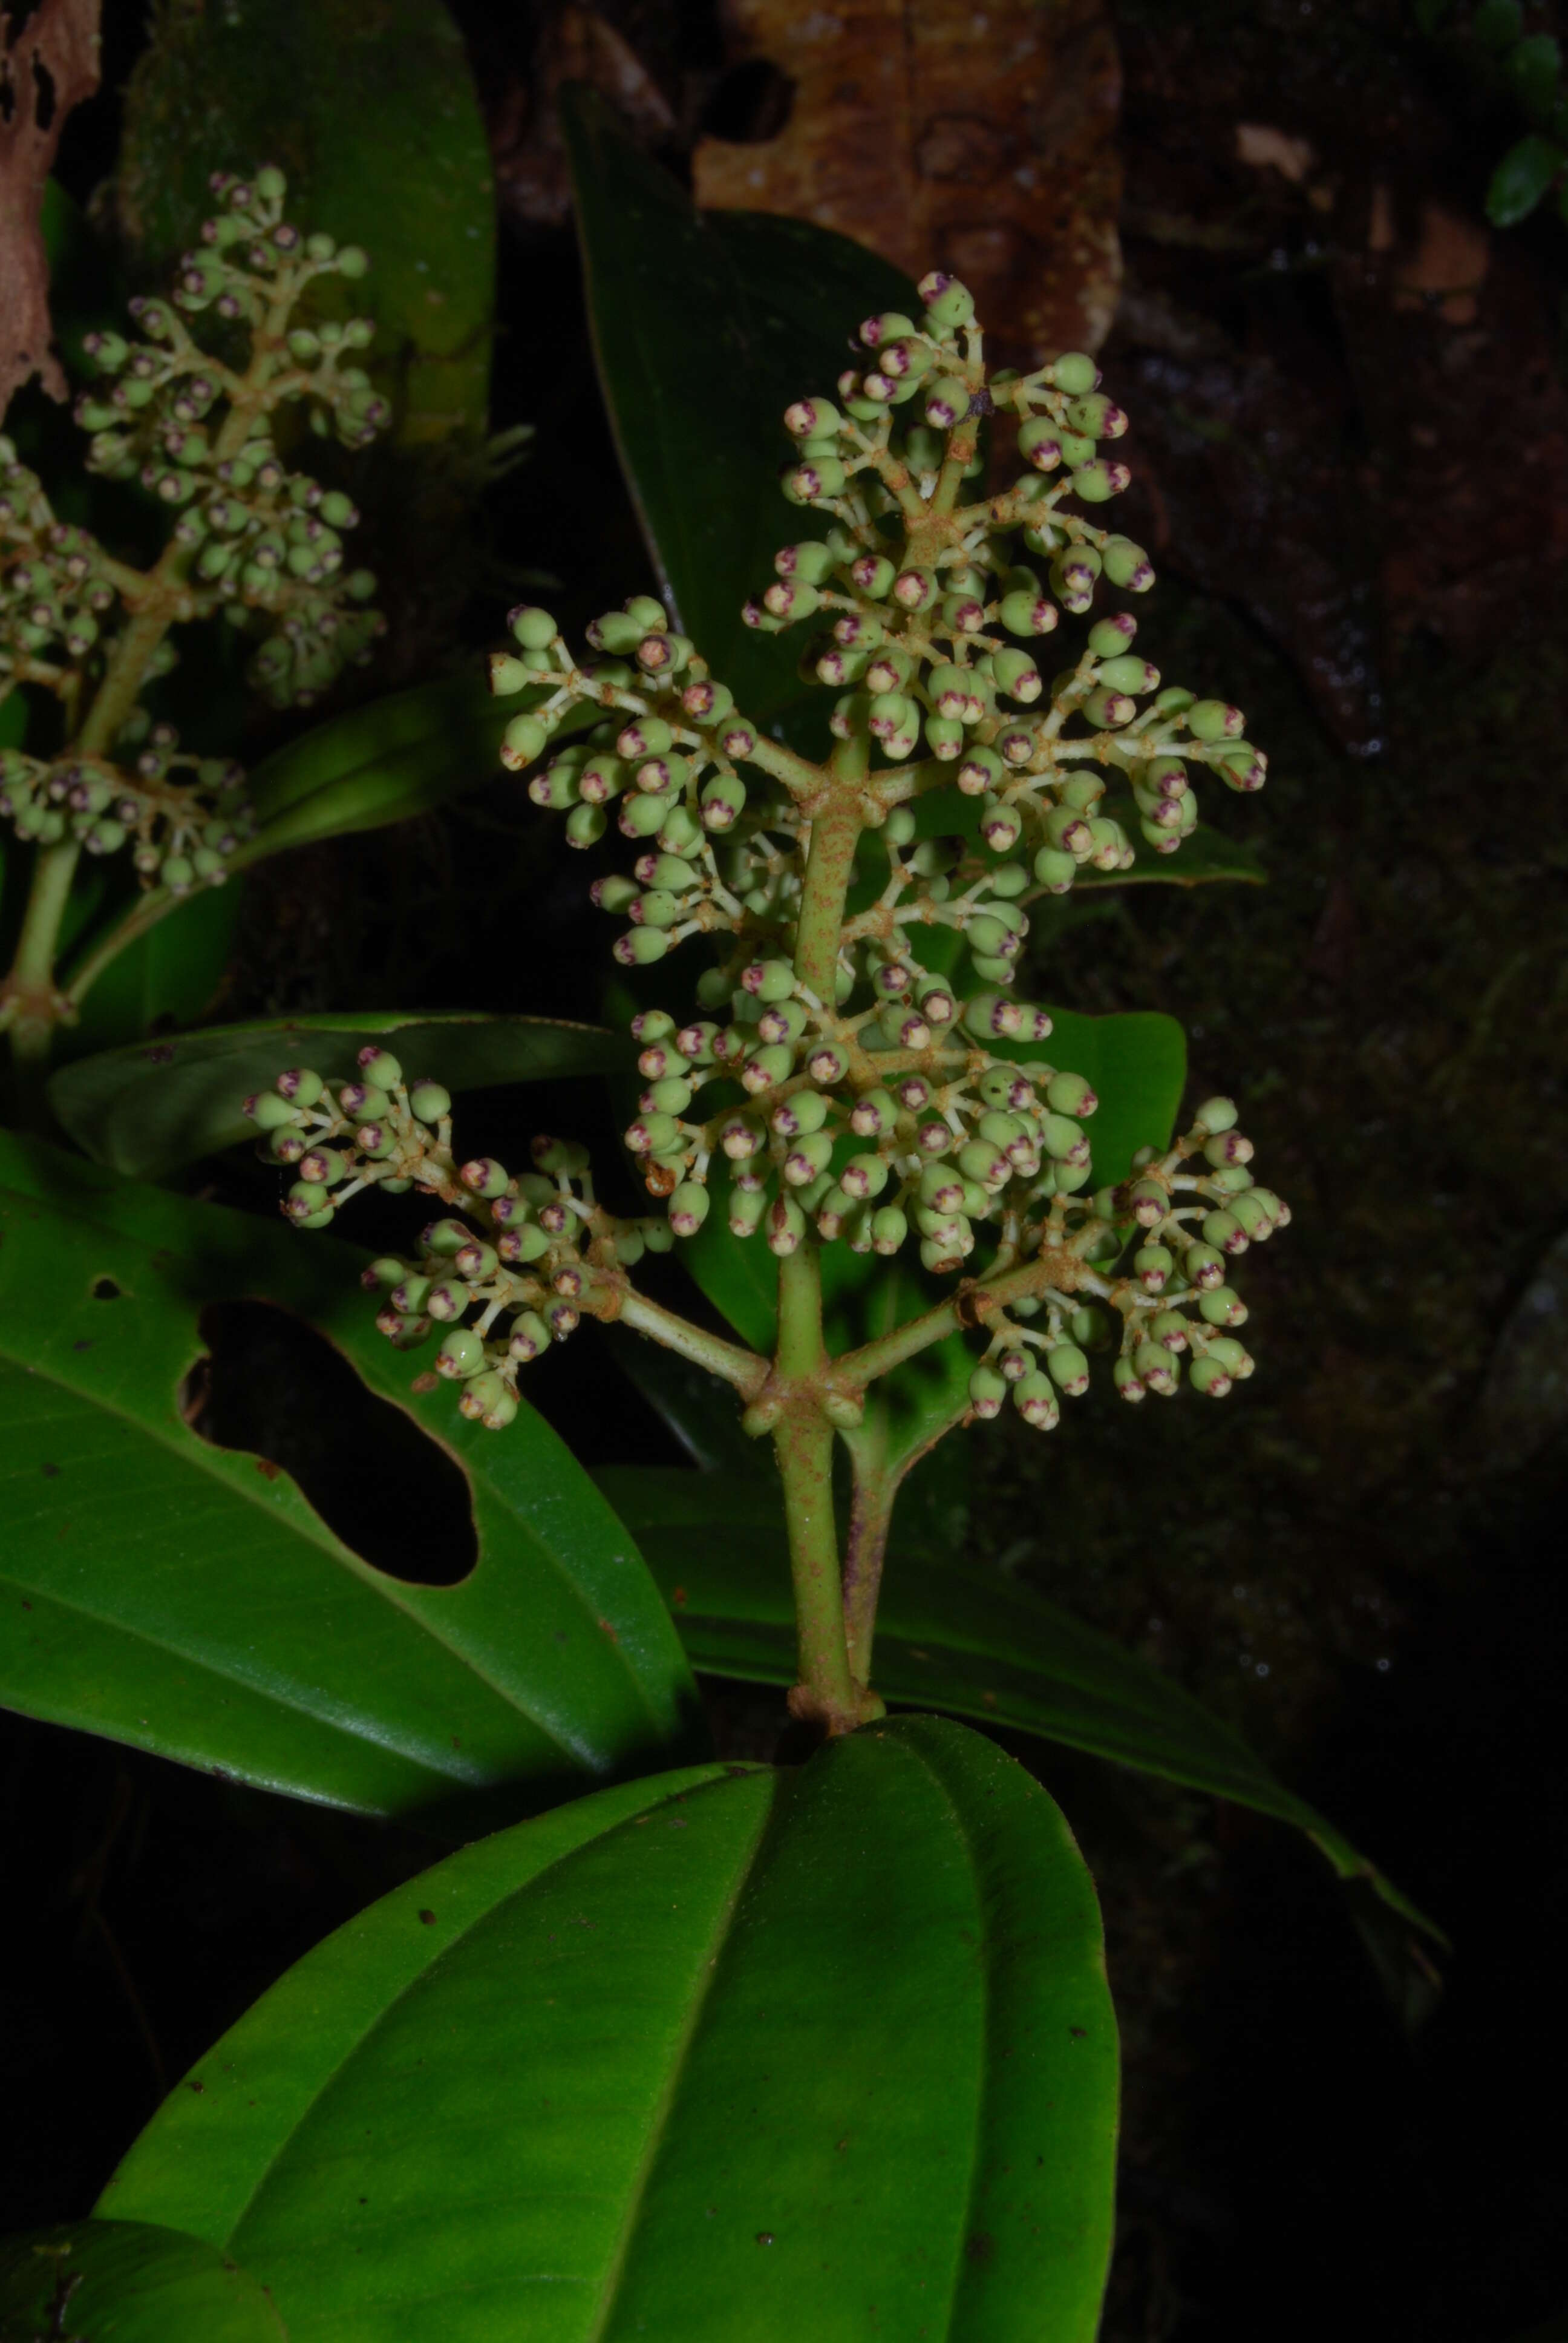 Image of Miconia